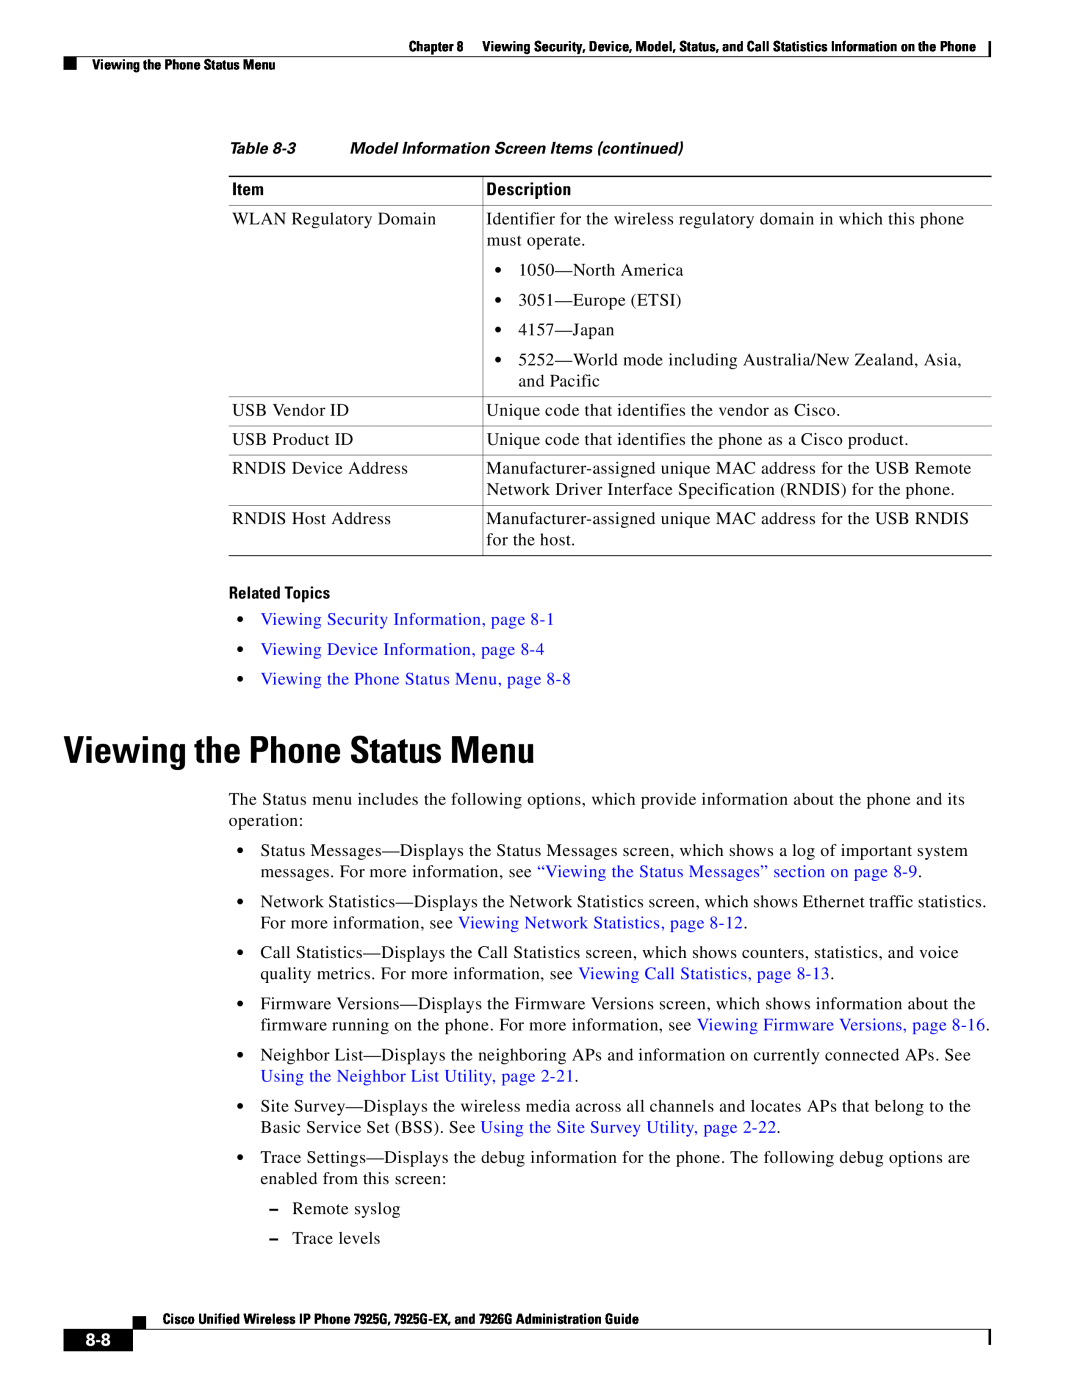 Cisco Systems 7925G-EX, 7926G manual Description, Related Topics, Viewing the Phone Status Menu, page 